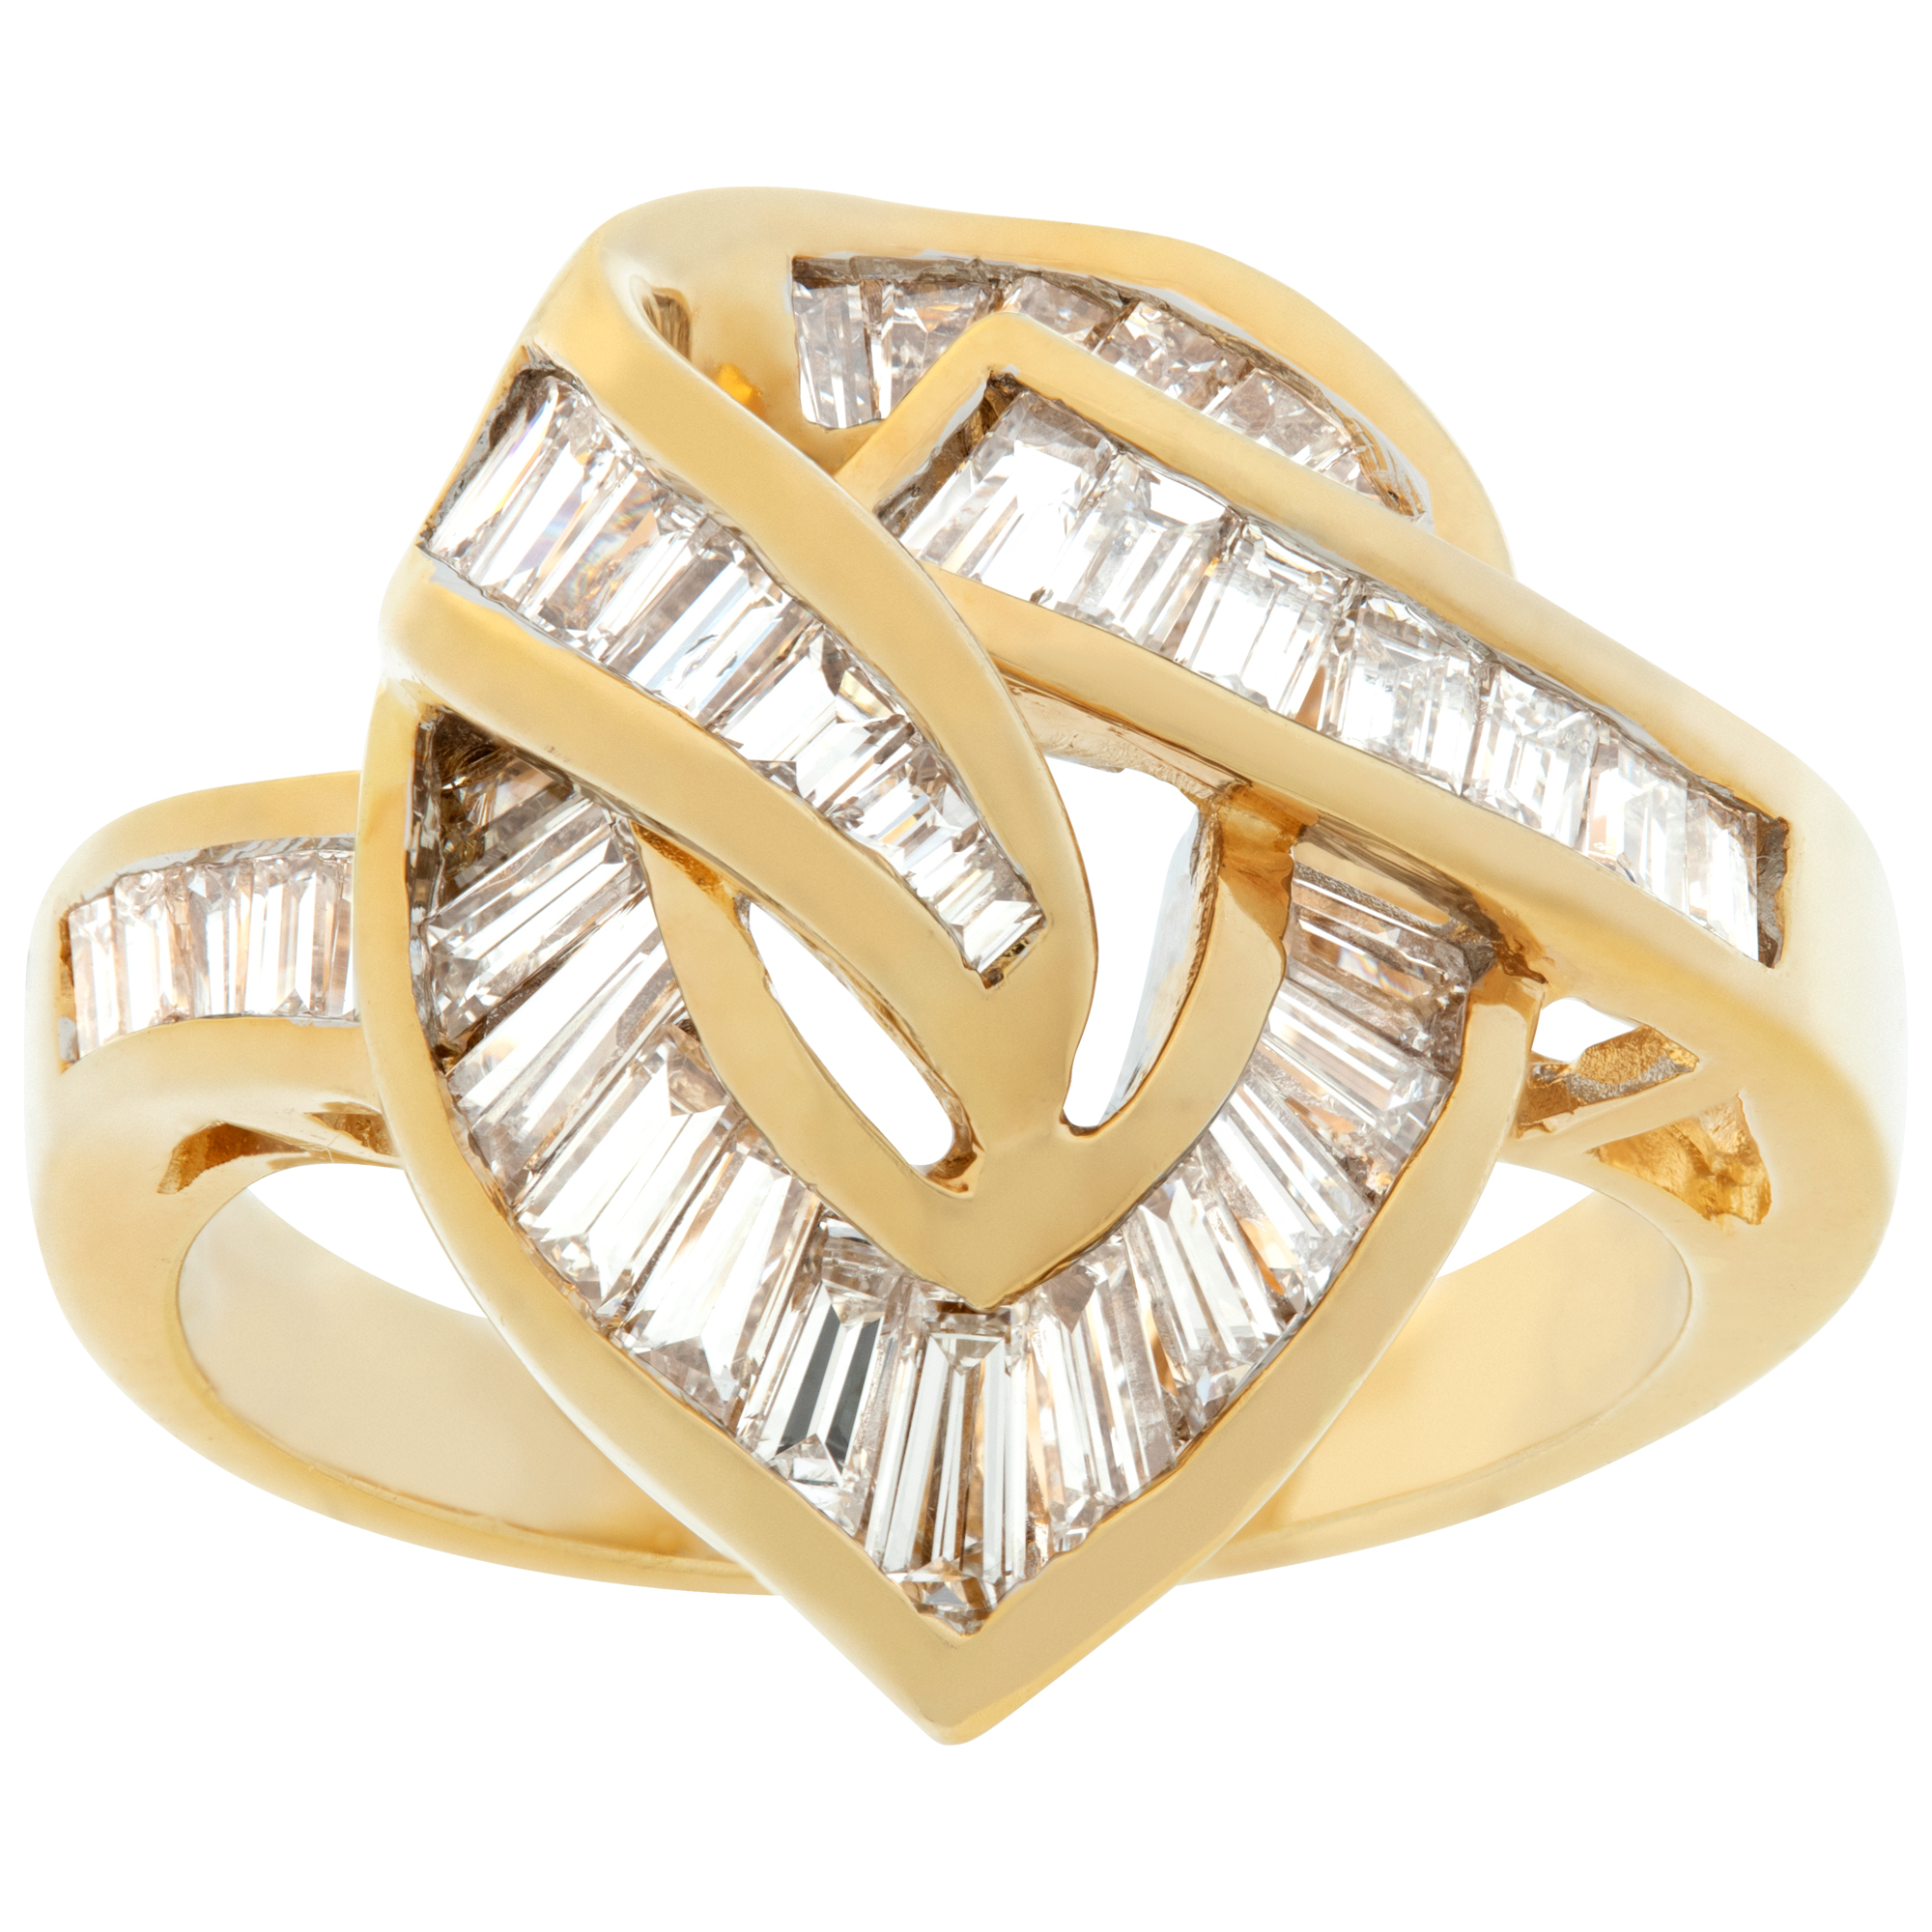 18k yellow gold swirl of diamonds ring with approximately 3 carats in baguette image 1